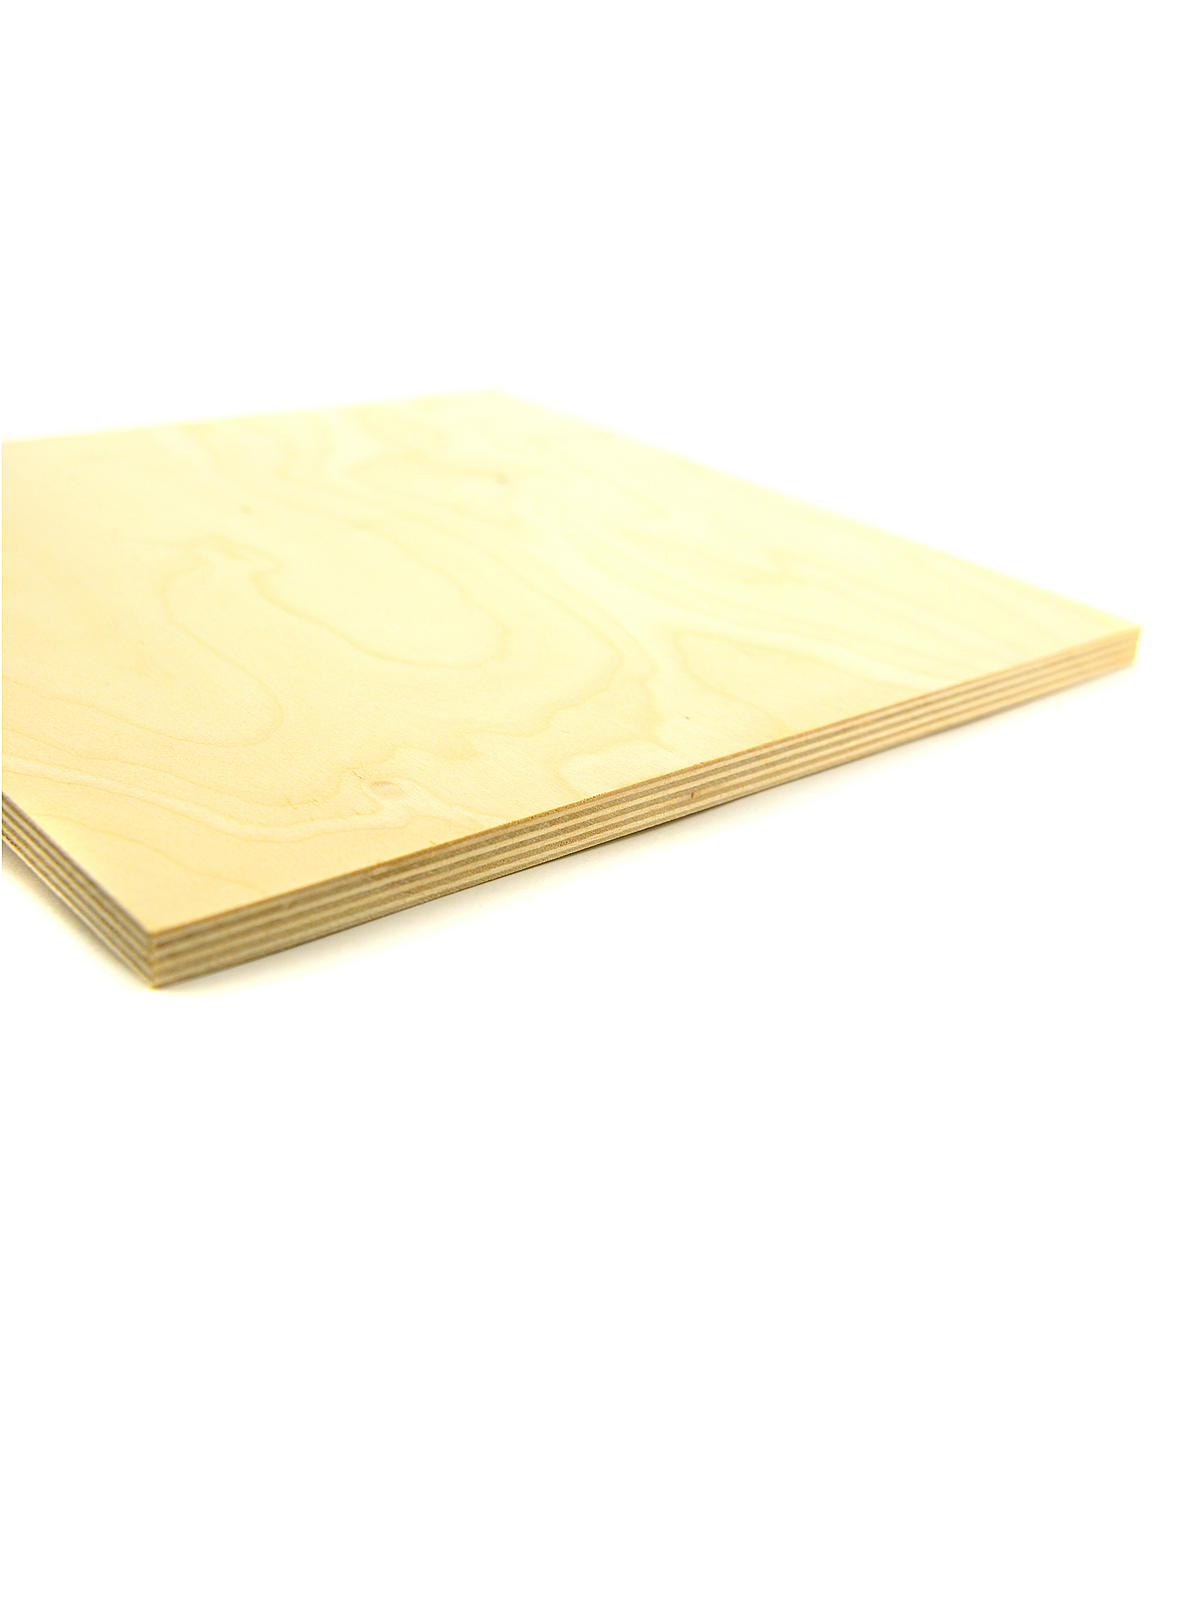 Craft Plywood Sheets 1 2 In. 12 In. X 12 In.